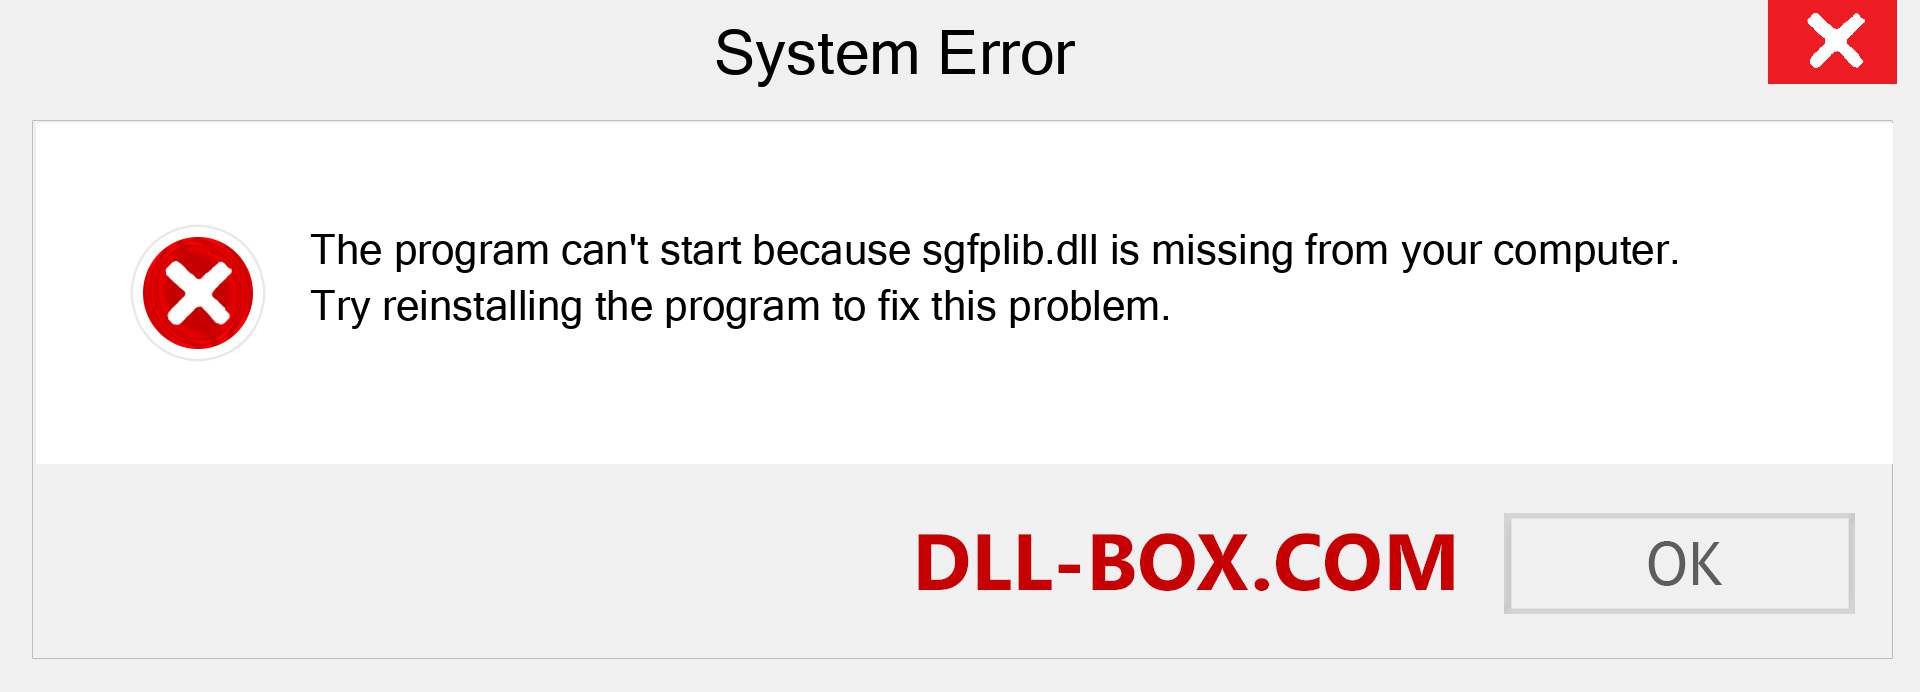  sgfplib.dll file is missing?. Download for Windows 7, 8, 10 - Fix  sgfplib dll Missing Error on Windows, photos, images